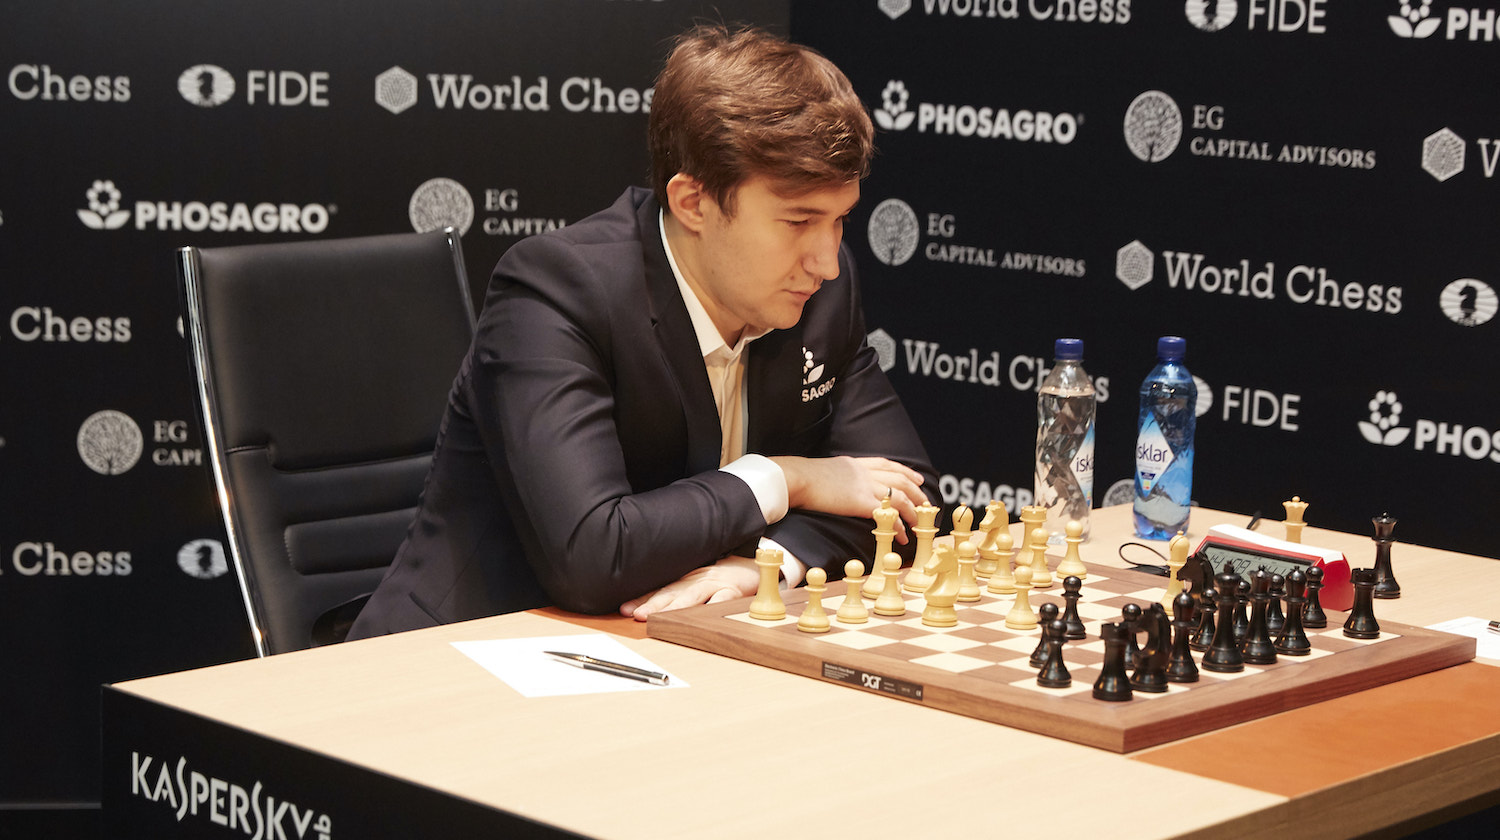 BERLIN, GERMANY - MARCH 10: Sergei Karjakin is seen playing the first round at the First Move Ceremony during the World Chess Tournament on March 10, 2018 in Berlin, Germany. (Photo by Sebastian Reuter/Getty Images for World Chess)